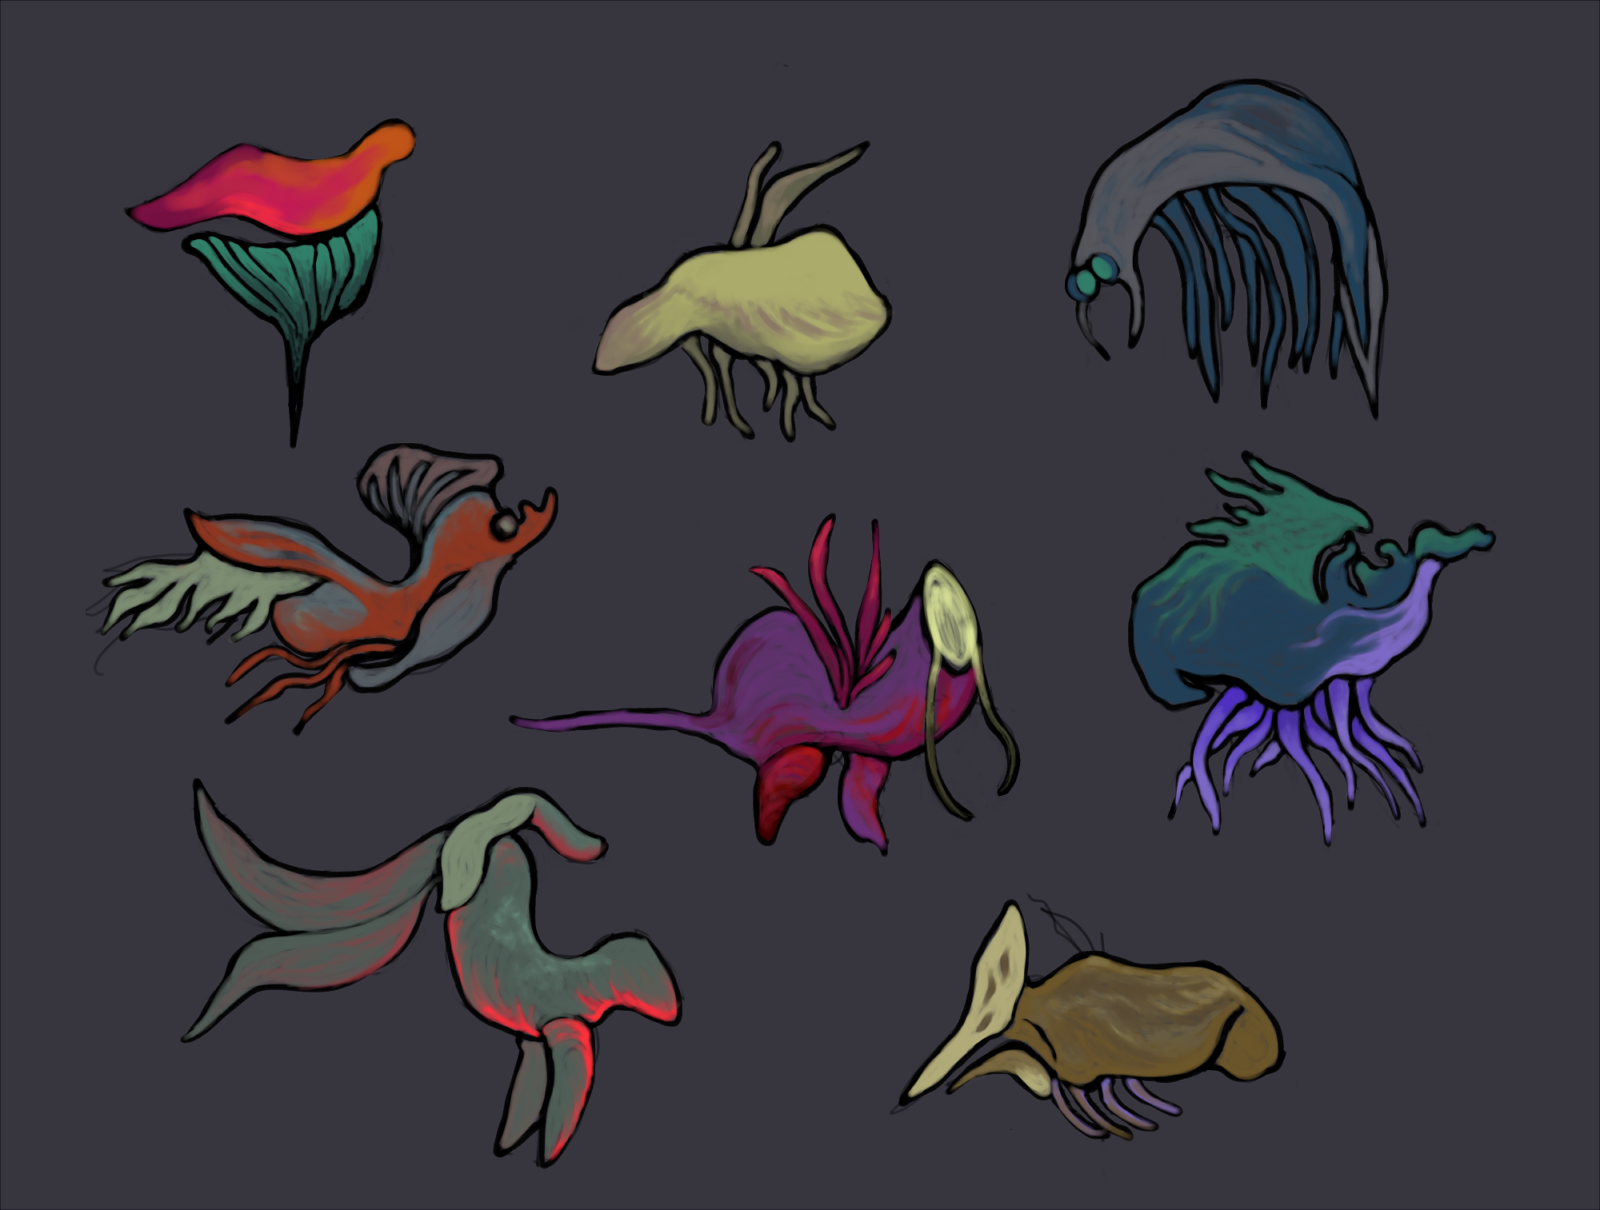 a drawing of 8 colorful creatures on a neutral gray background. the creatures are abstracted and vaguely resemble deep sea animals